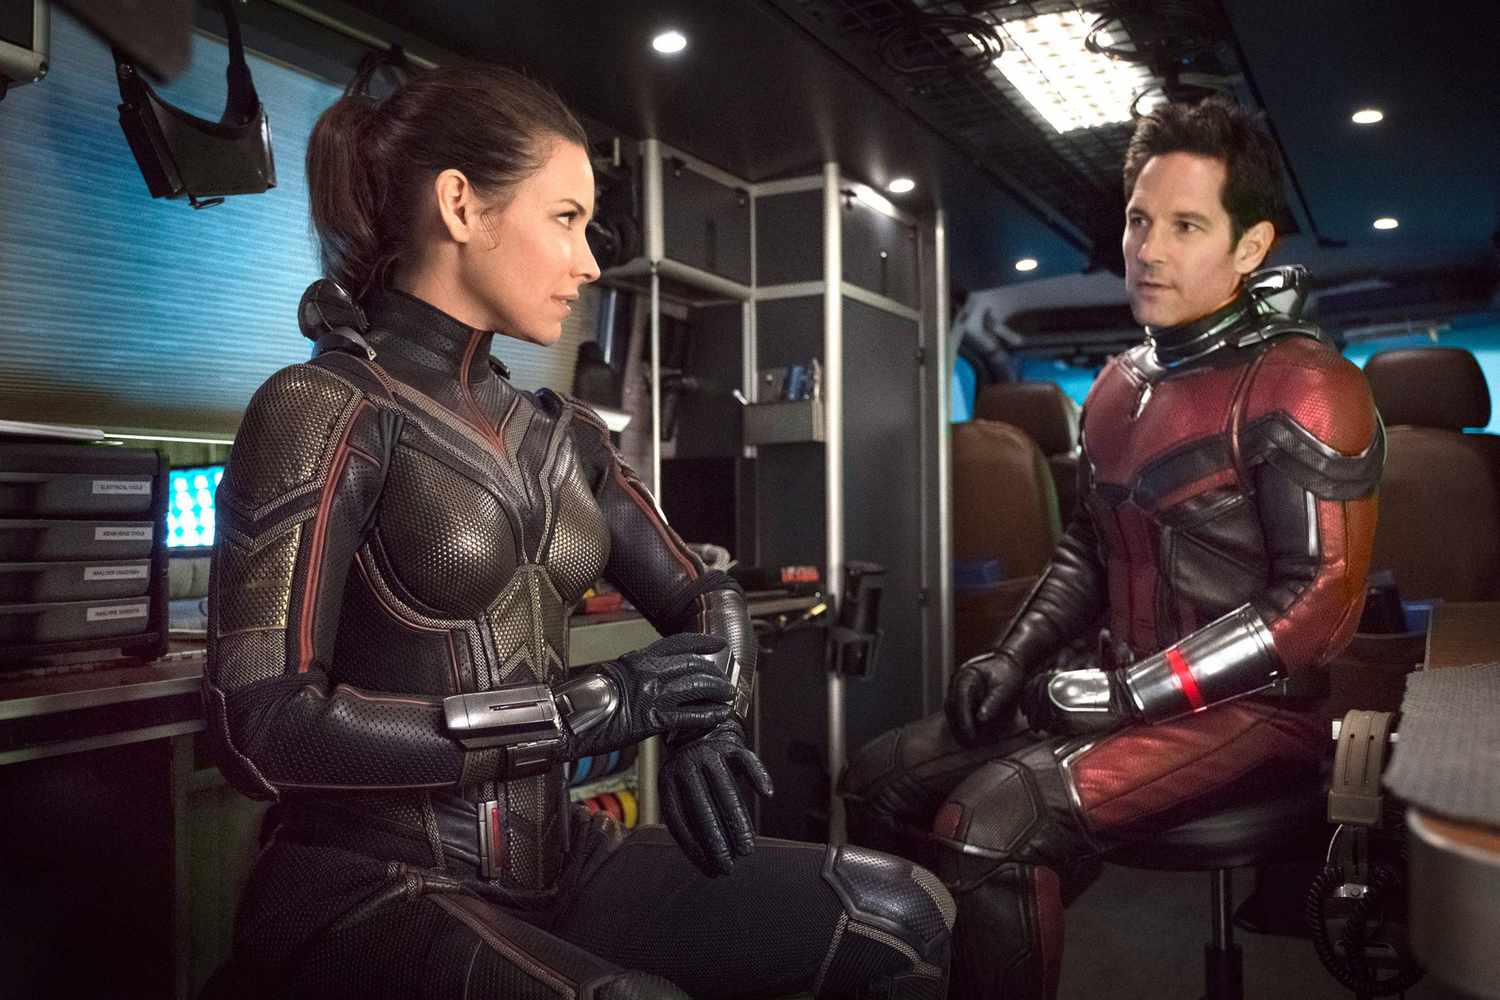 evangeline lilly, the wasp, ant-man